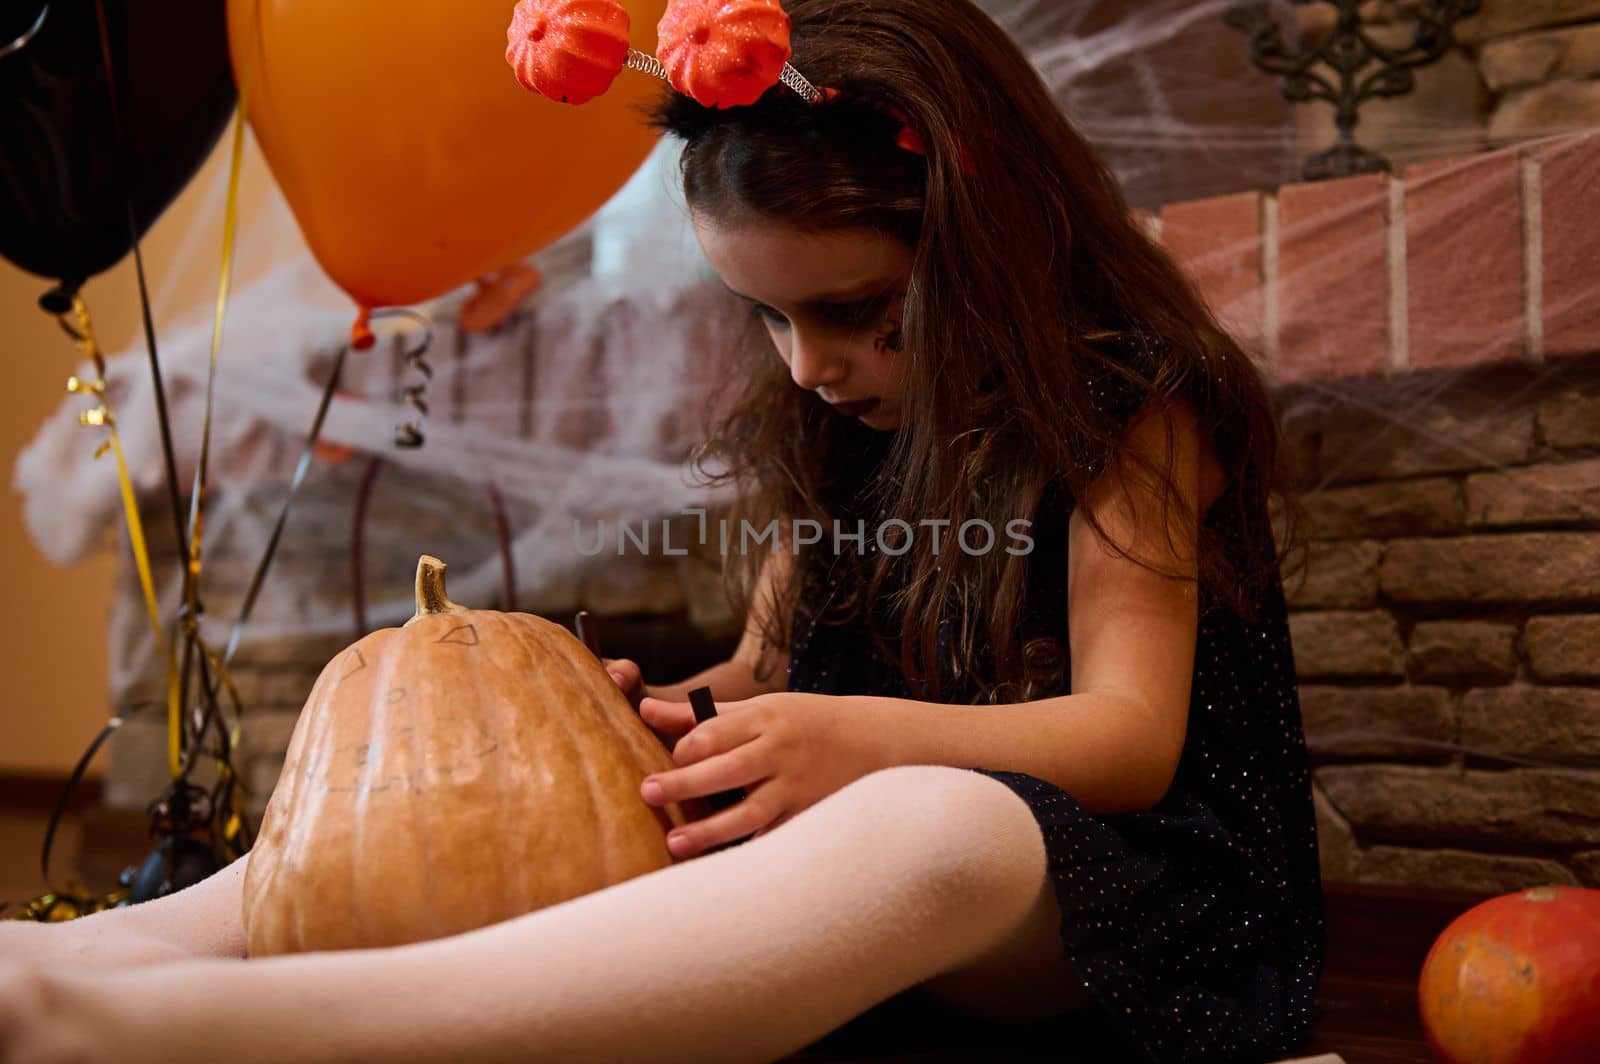 Close-up of an adorable child, a little girl, looking like an enchantress, concentrated on drawing a scary face on a pumpkin, a Jack-O-Lantern, sitting near orange and black air balloons. Halloween